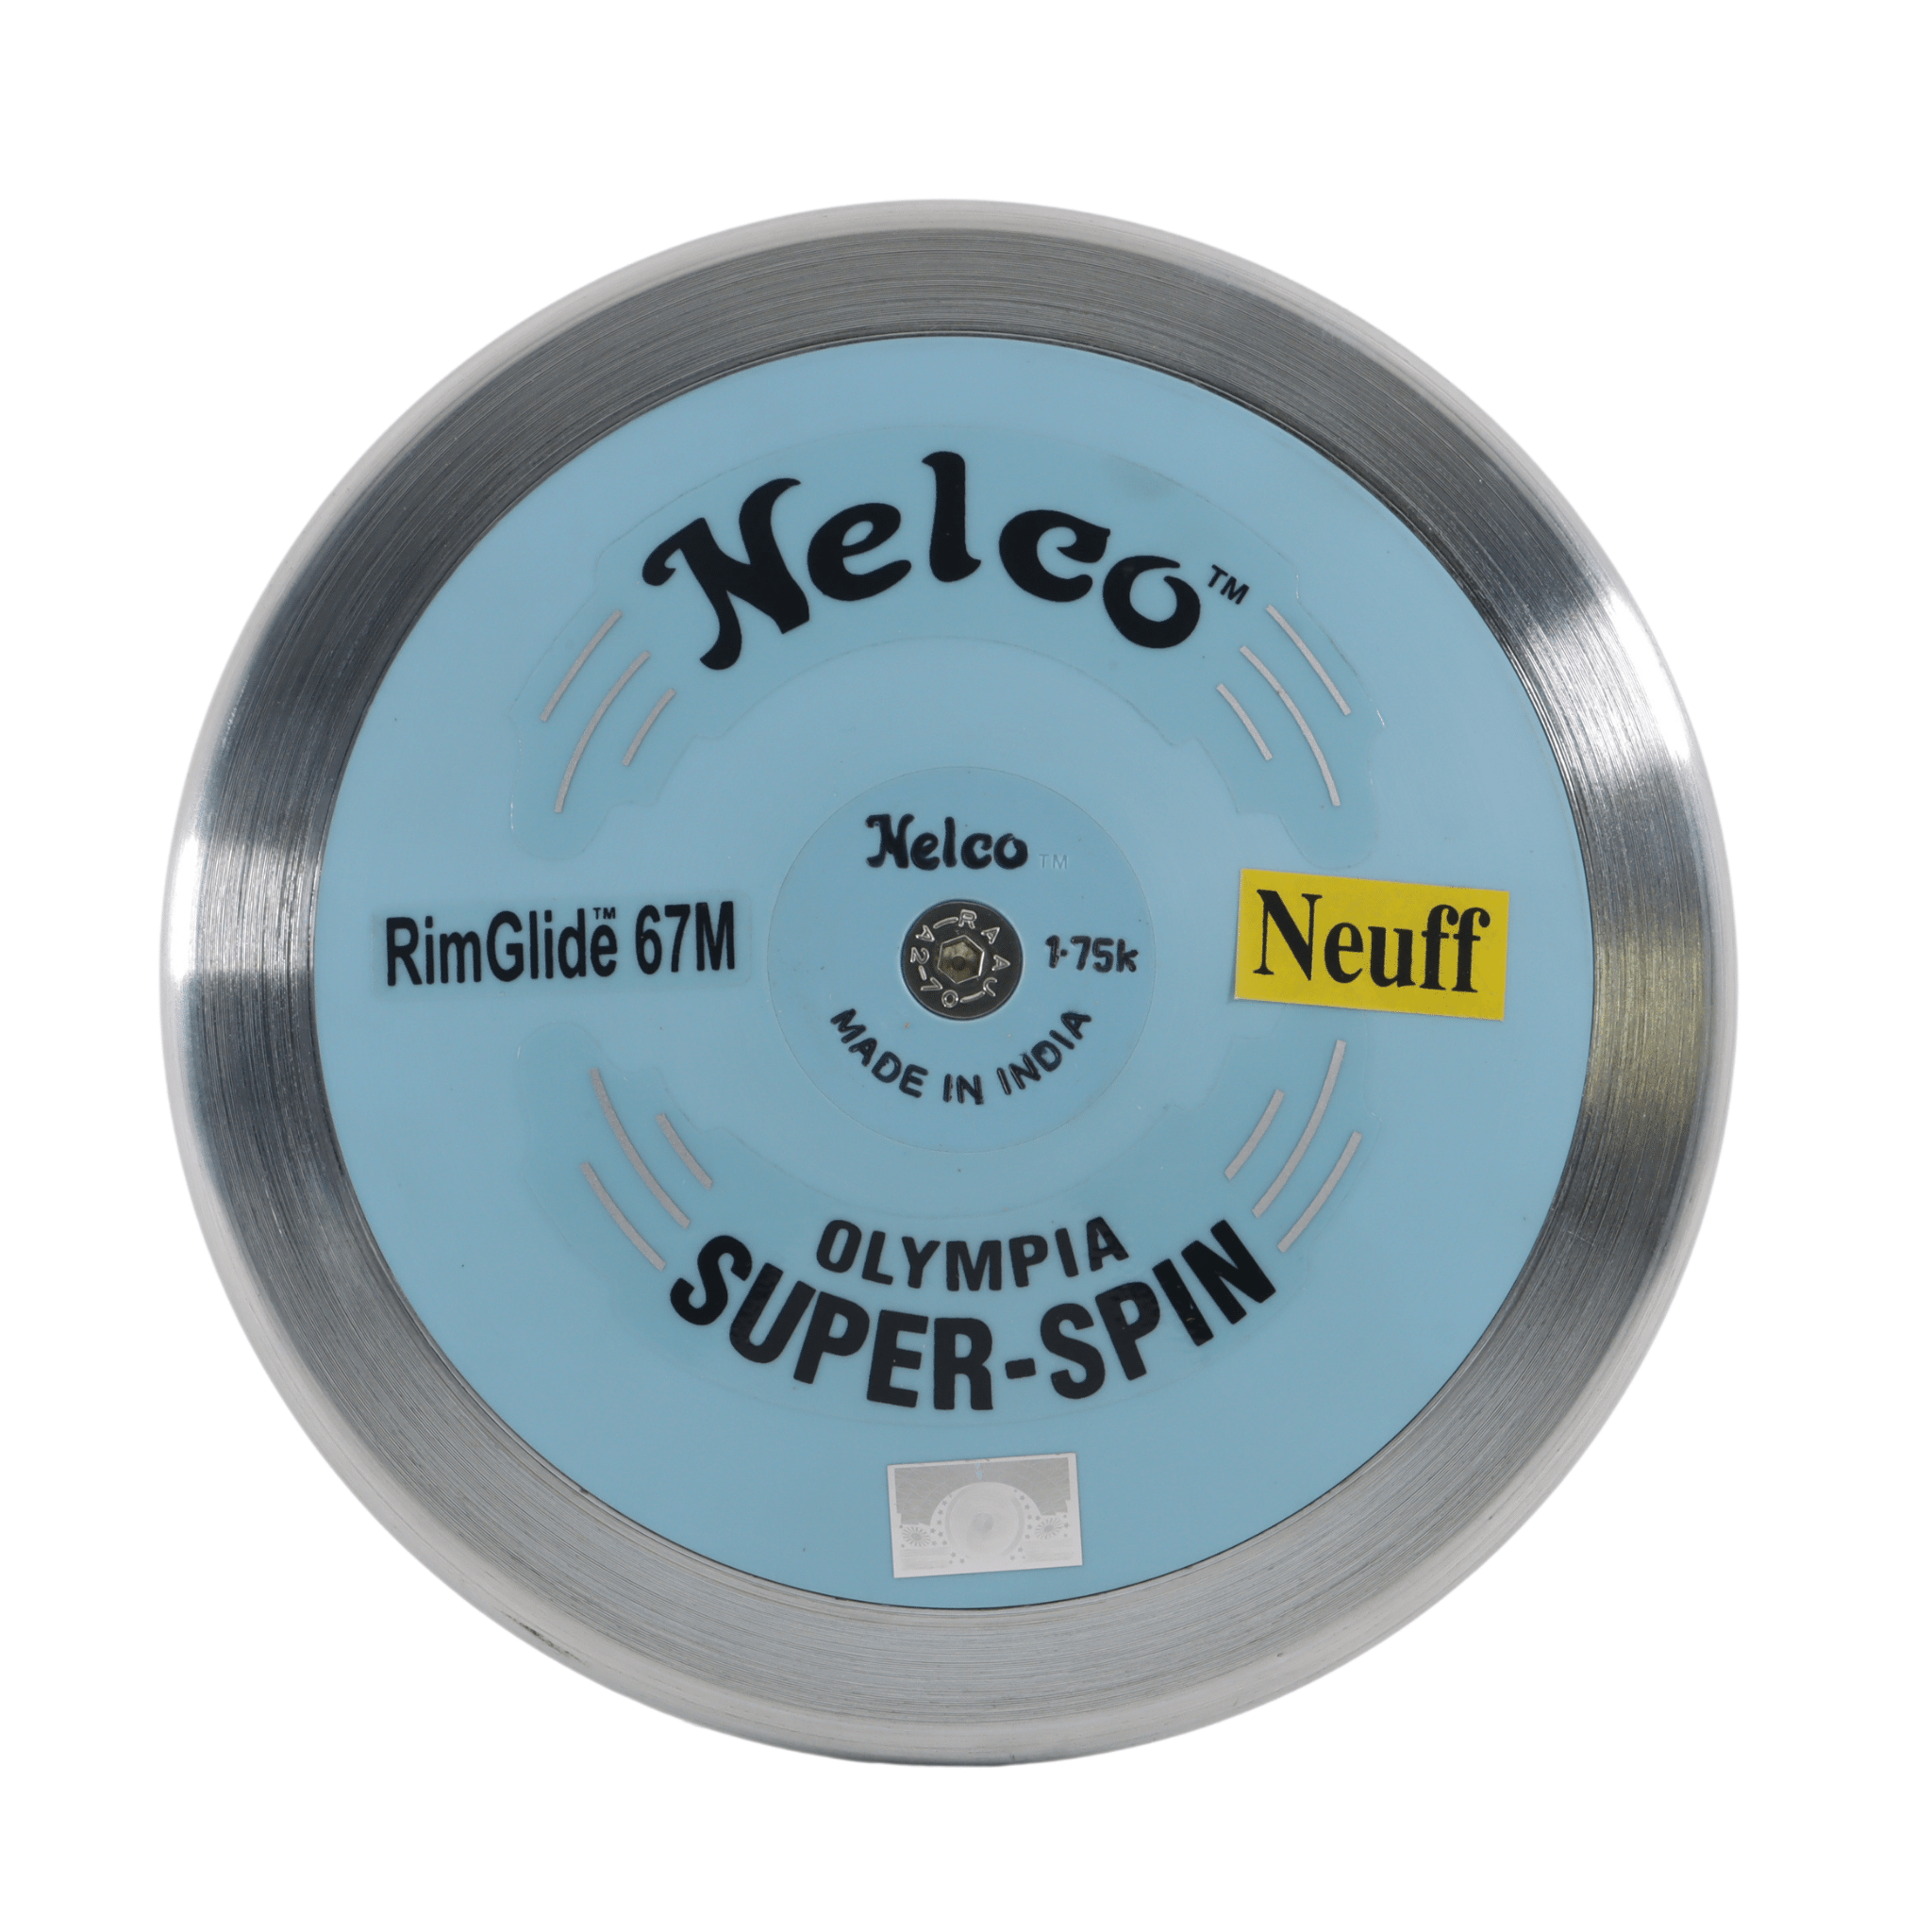 Nelco Olympia Super Spin Discus | Blue side plates | 1.75 kg